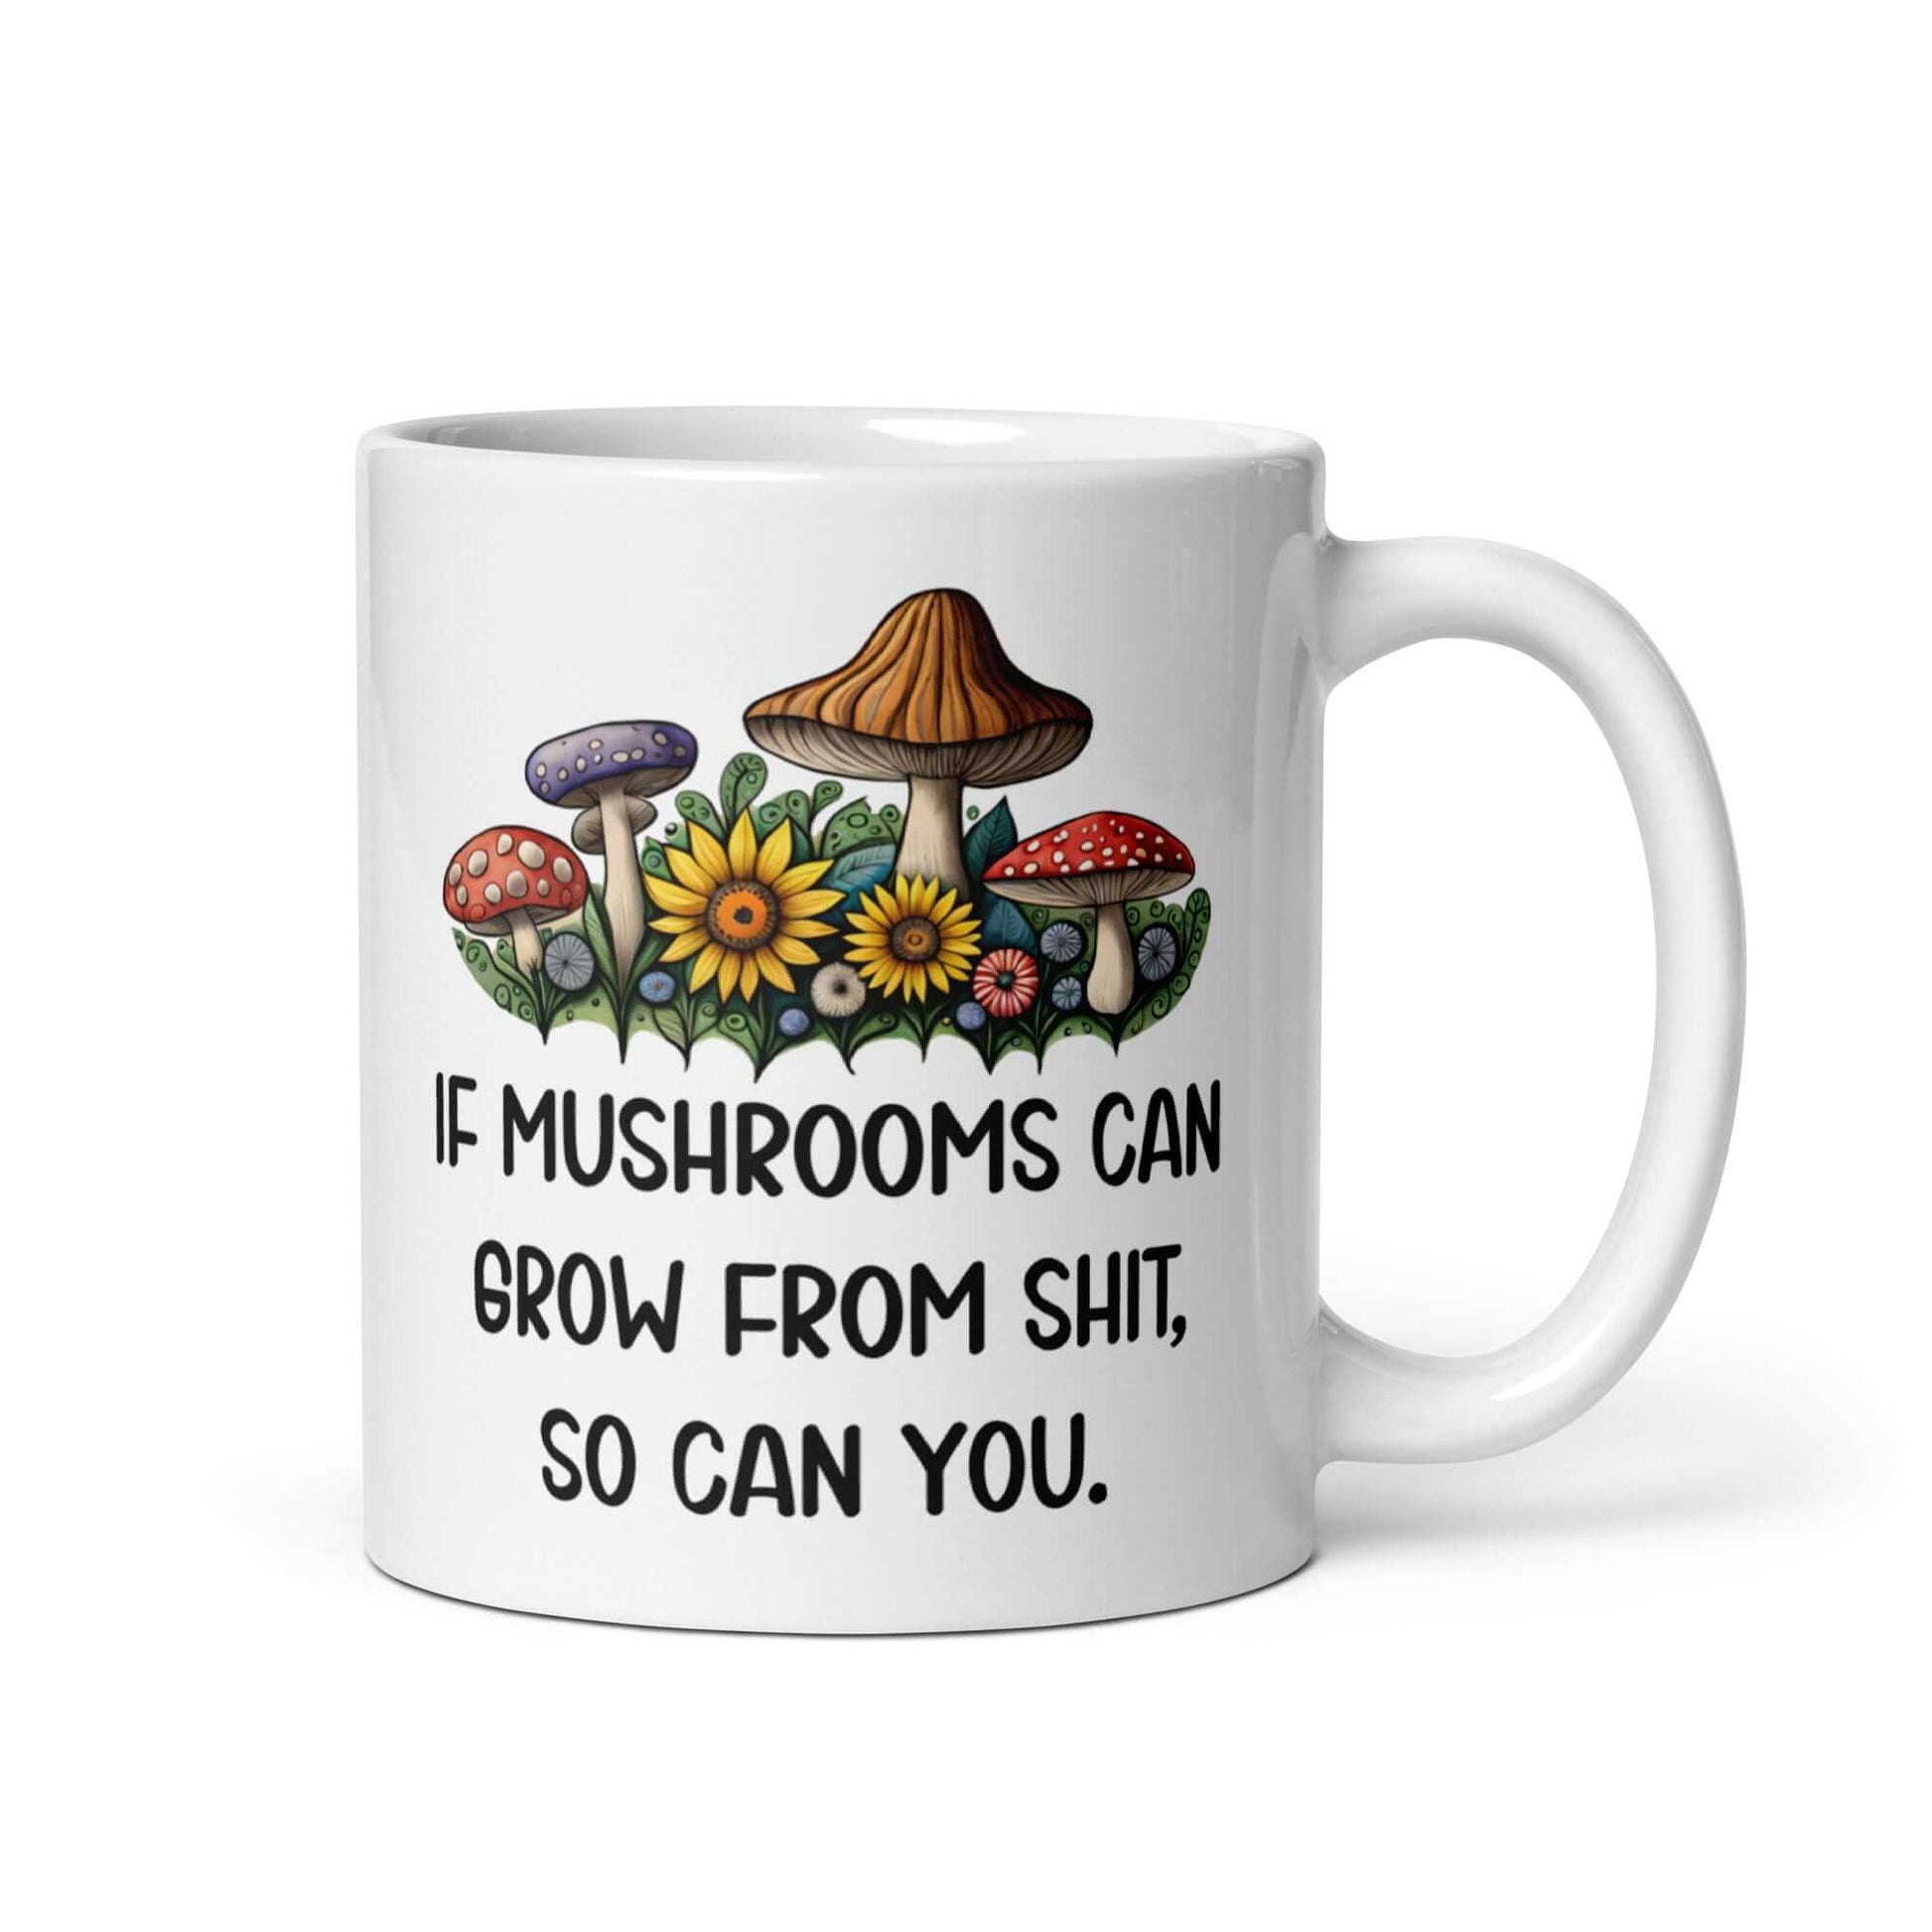 White ceramic mug with images of mushrooms and the phrase If mushrooms can grow from shit so can you printed on both sides of the mug.